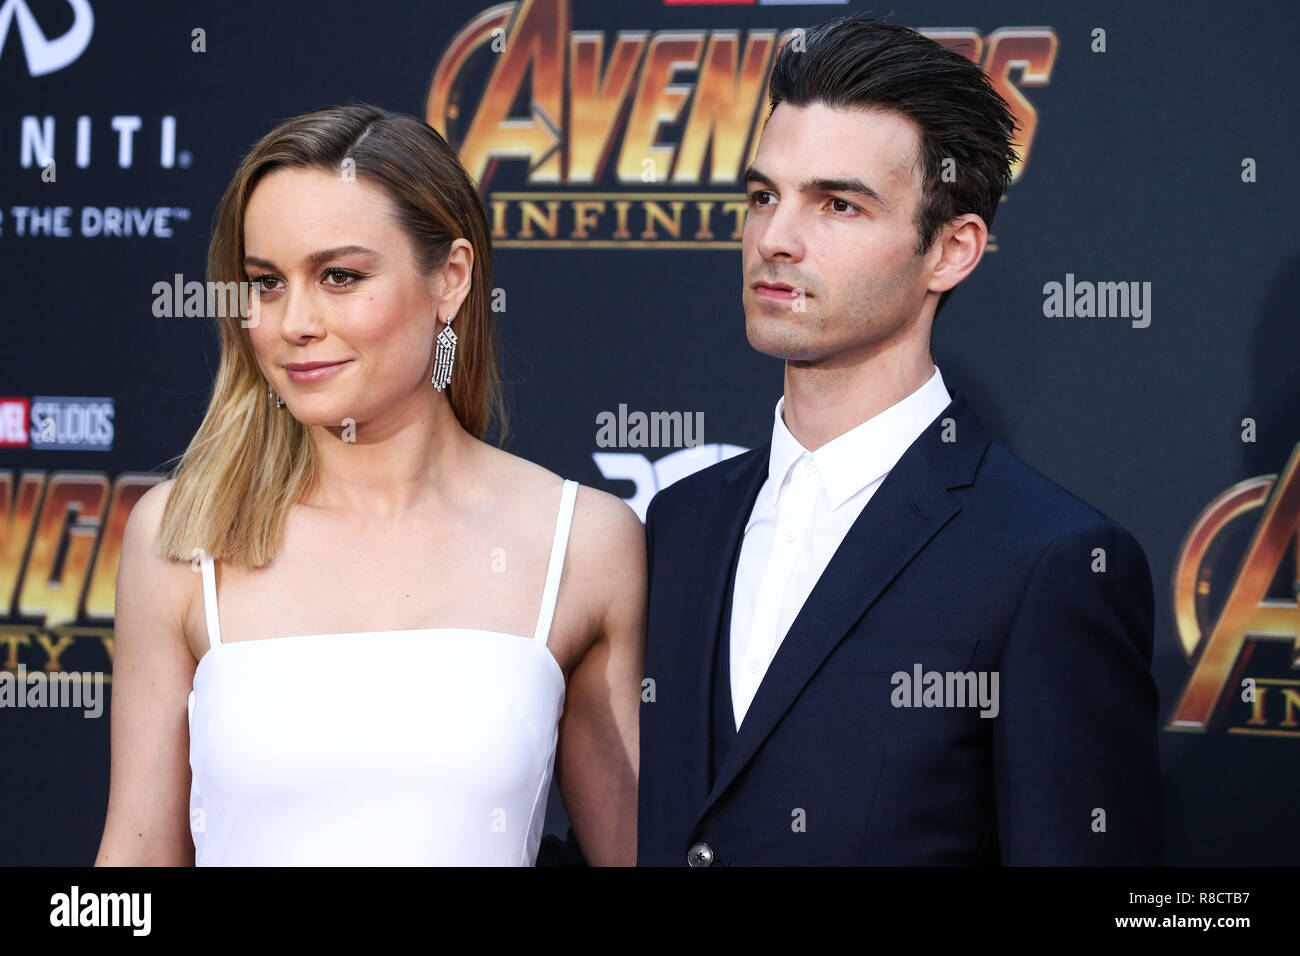 HOLLYWOOD, LOS ANGELES, CA, USA - APRIL 23: Brie Larson, Alex Greenwald at the World Premiere Of Disney And Marvel's 'Avengers: Infinity War' held at the El Capitan Theatre, Dolby Theatre and TCL Chinese Theatre IMAX on April 23, 2018 in Hollywood, Los Angeles, California, United States. (Photo by Xavier Collin/Image Press Agency) Stock Photo